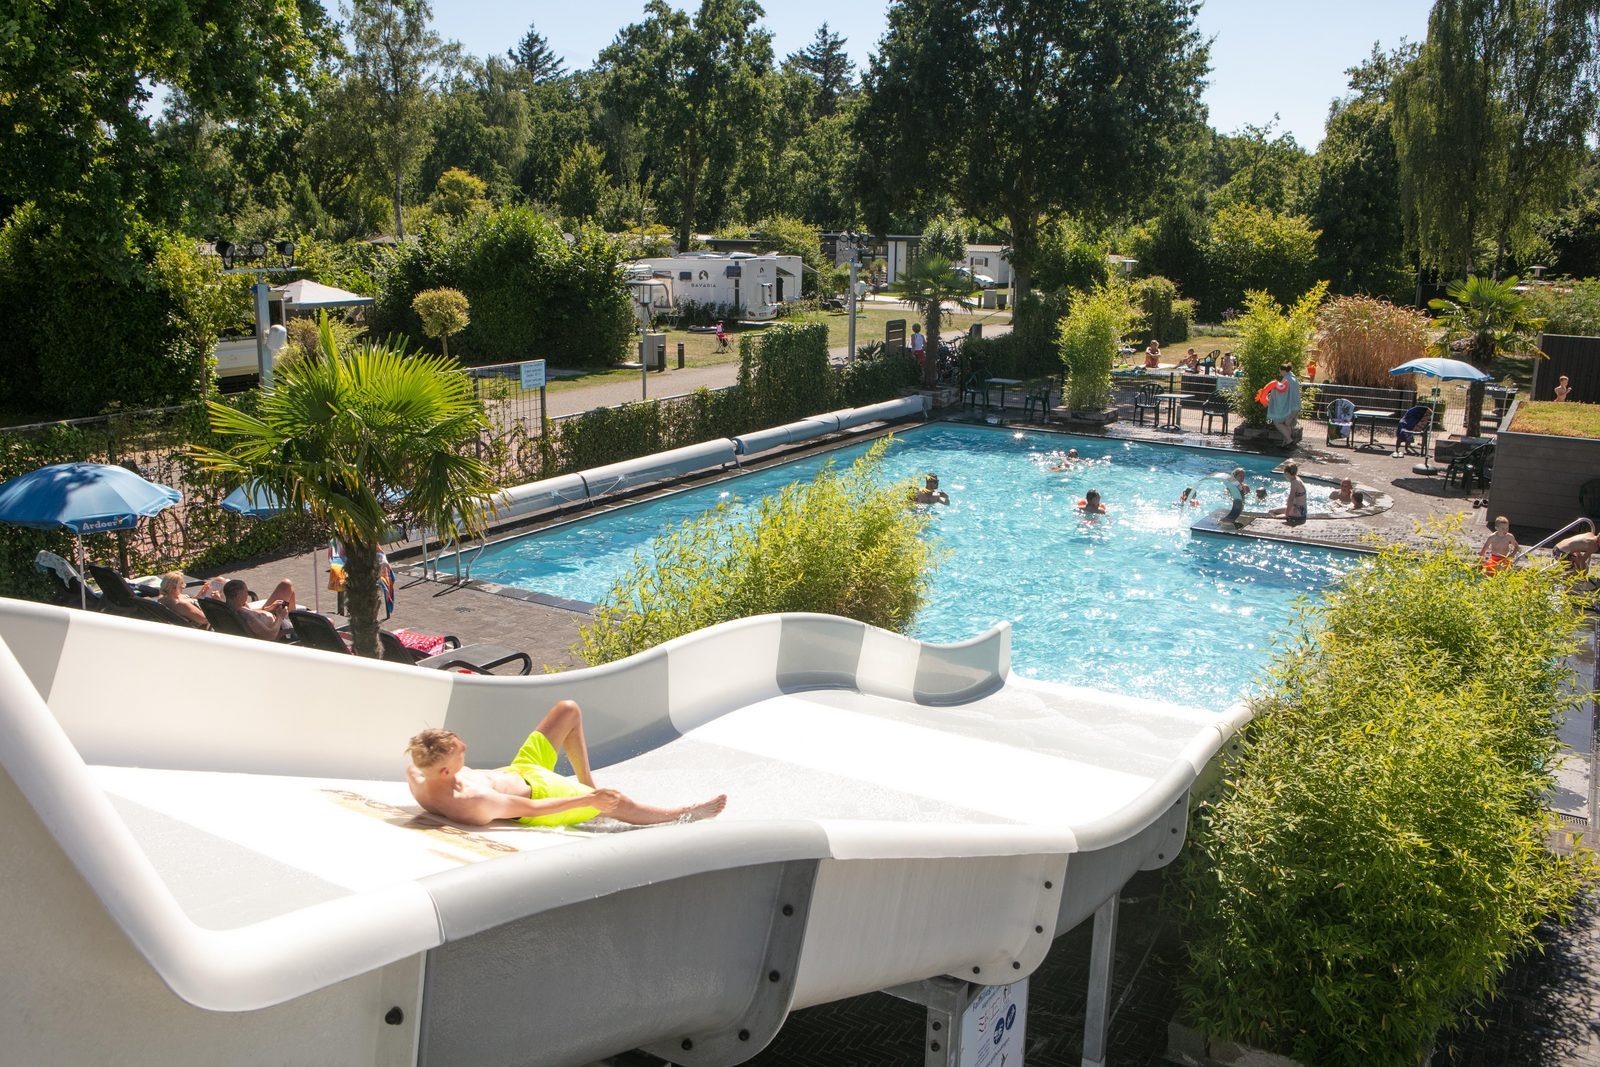 Camping Duitse grens